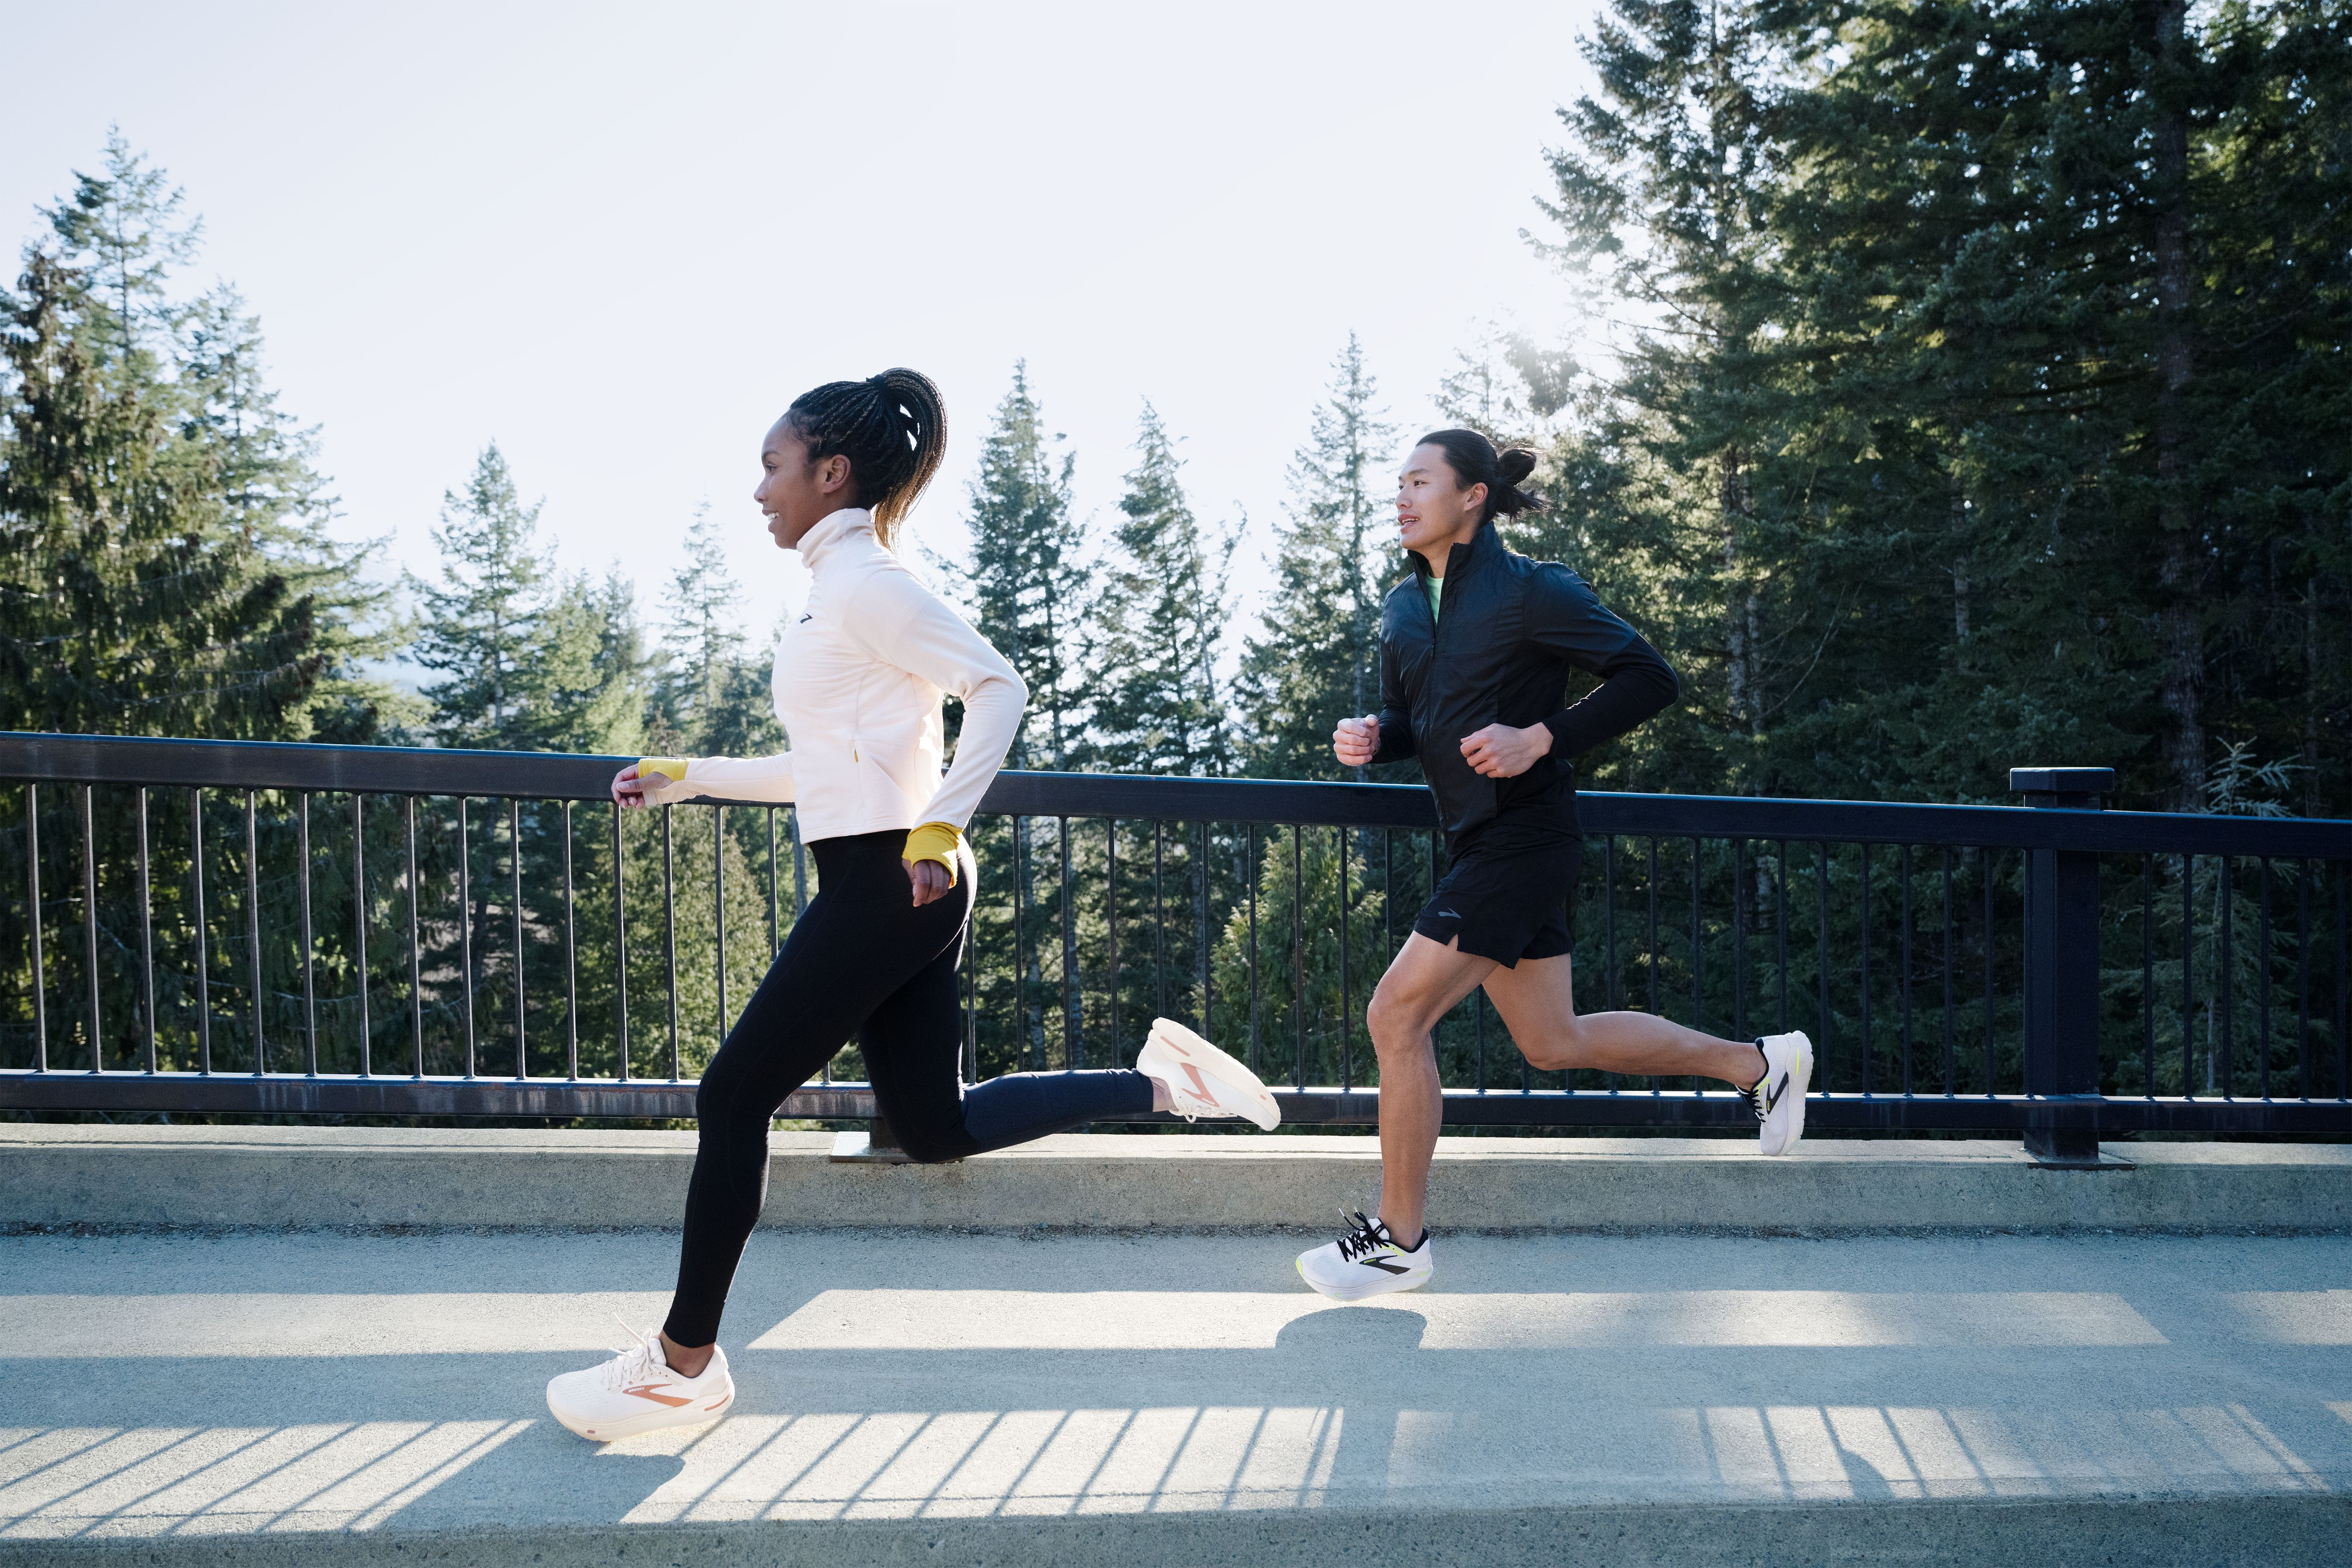 Get in Gear with Brooks Running Apparel